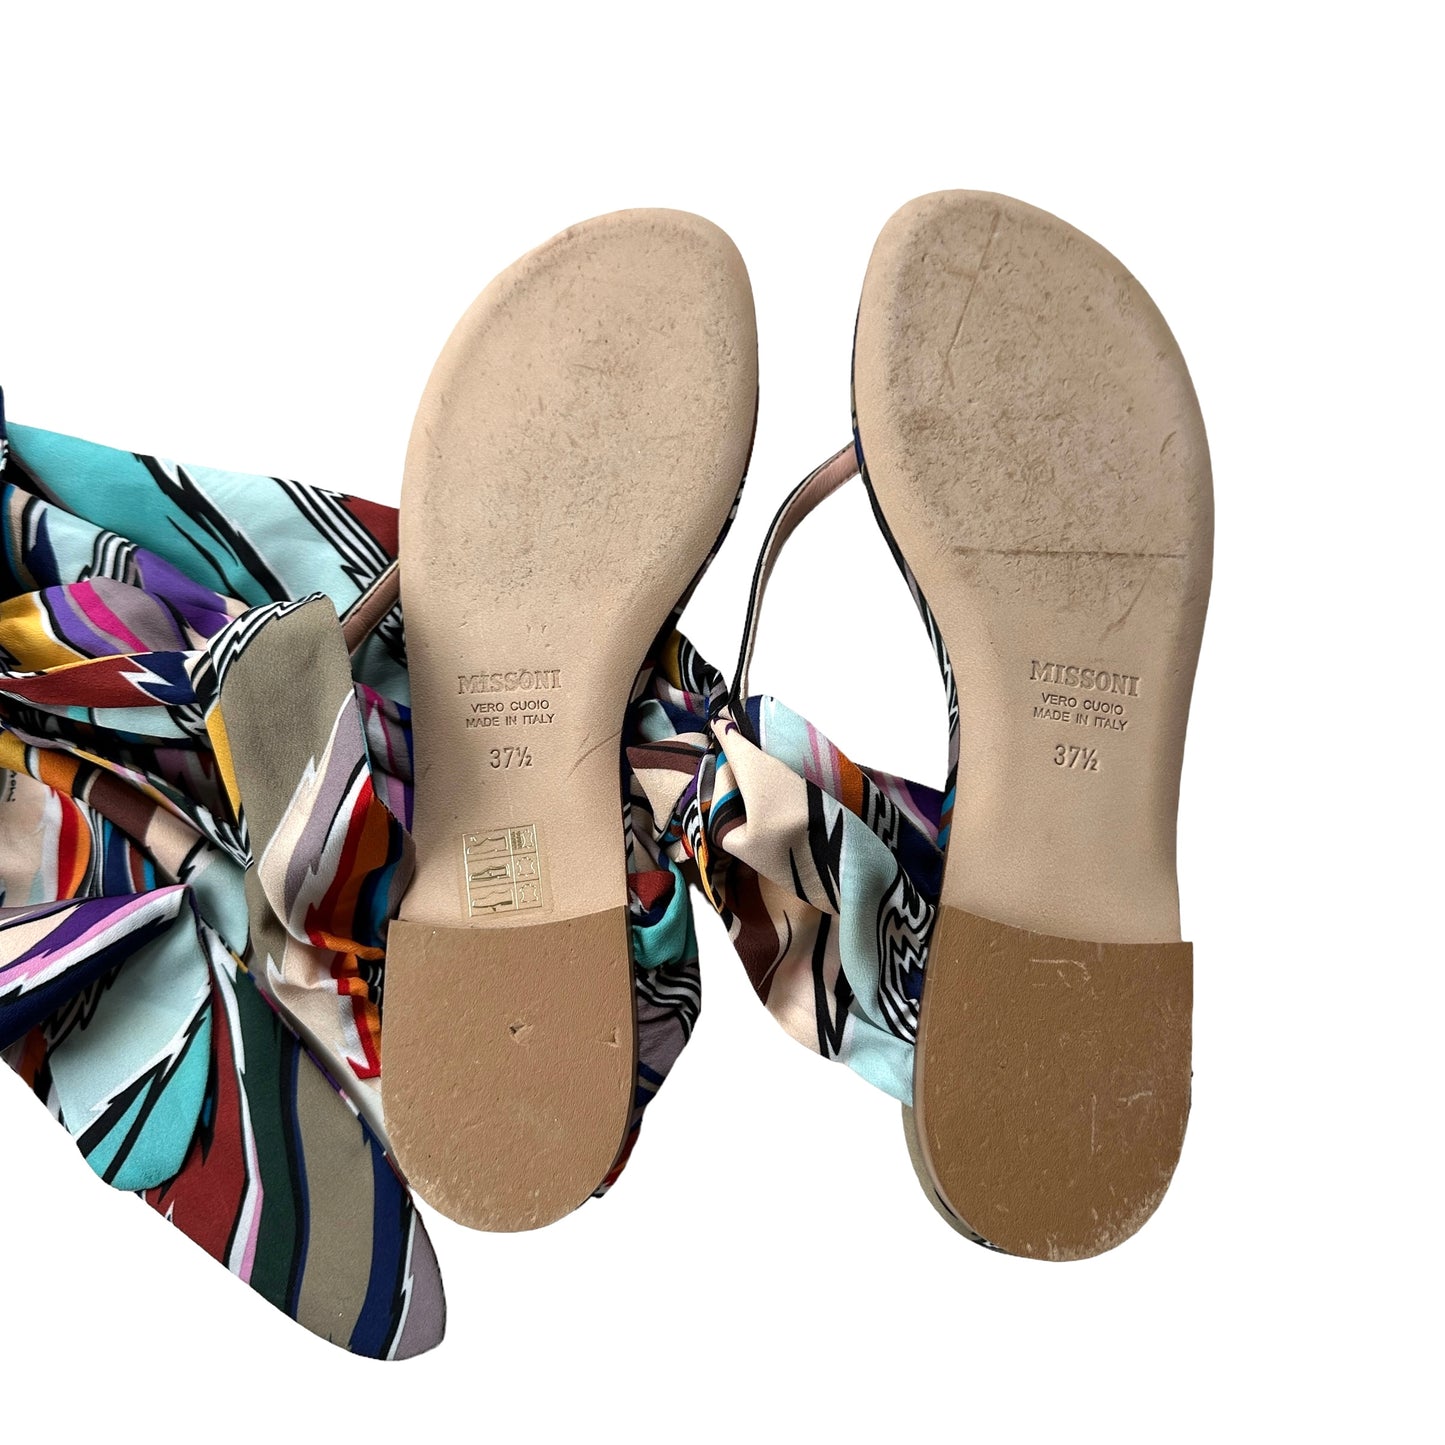 Printed Satin & Leather Sandals - 7.5